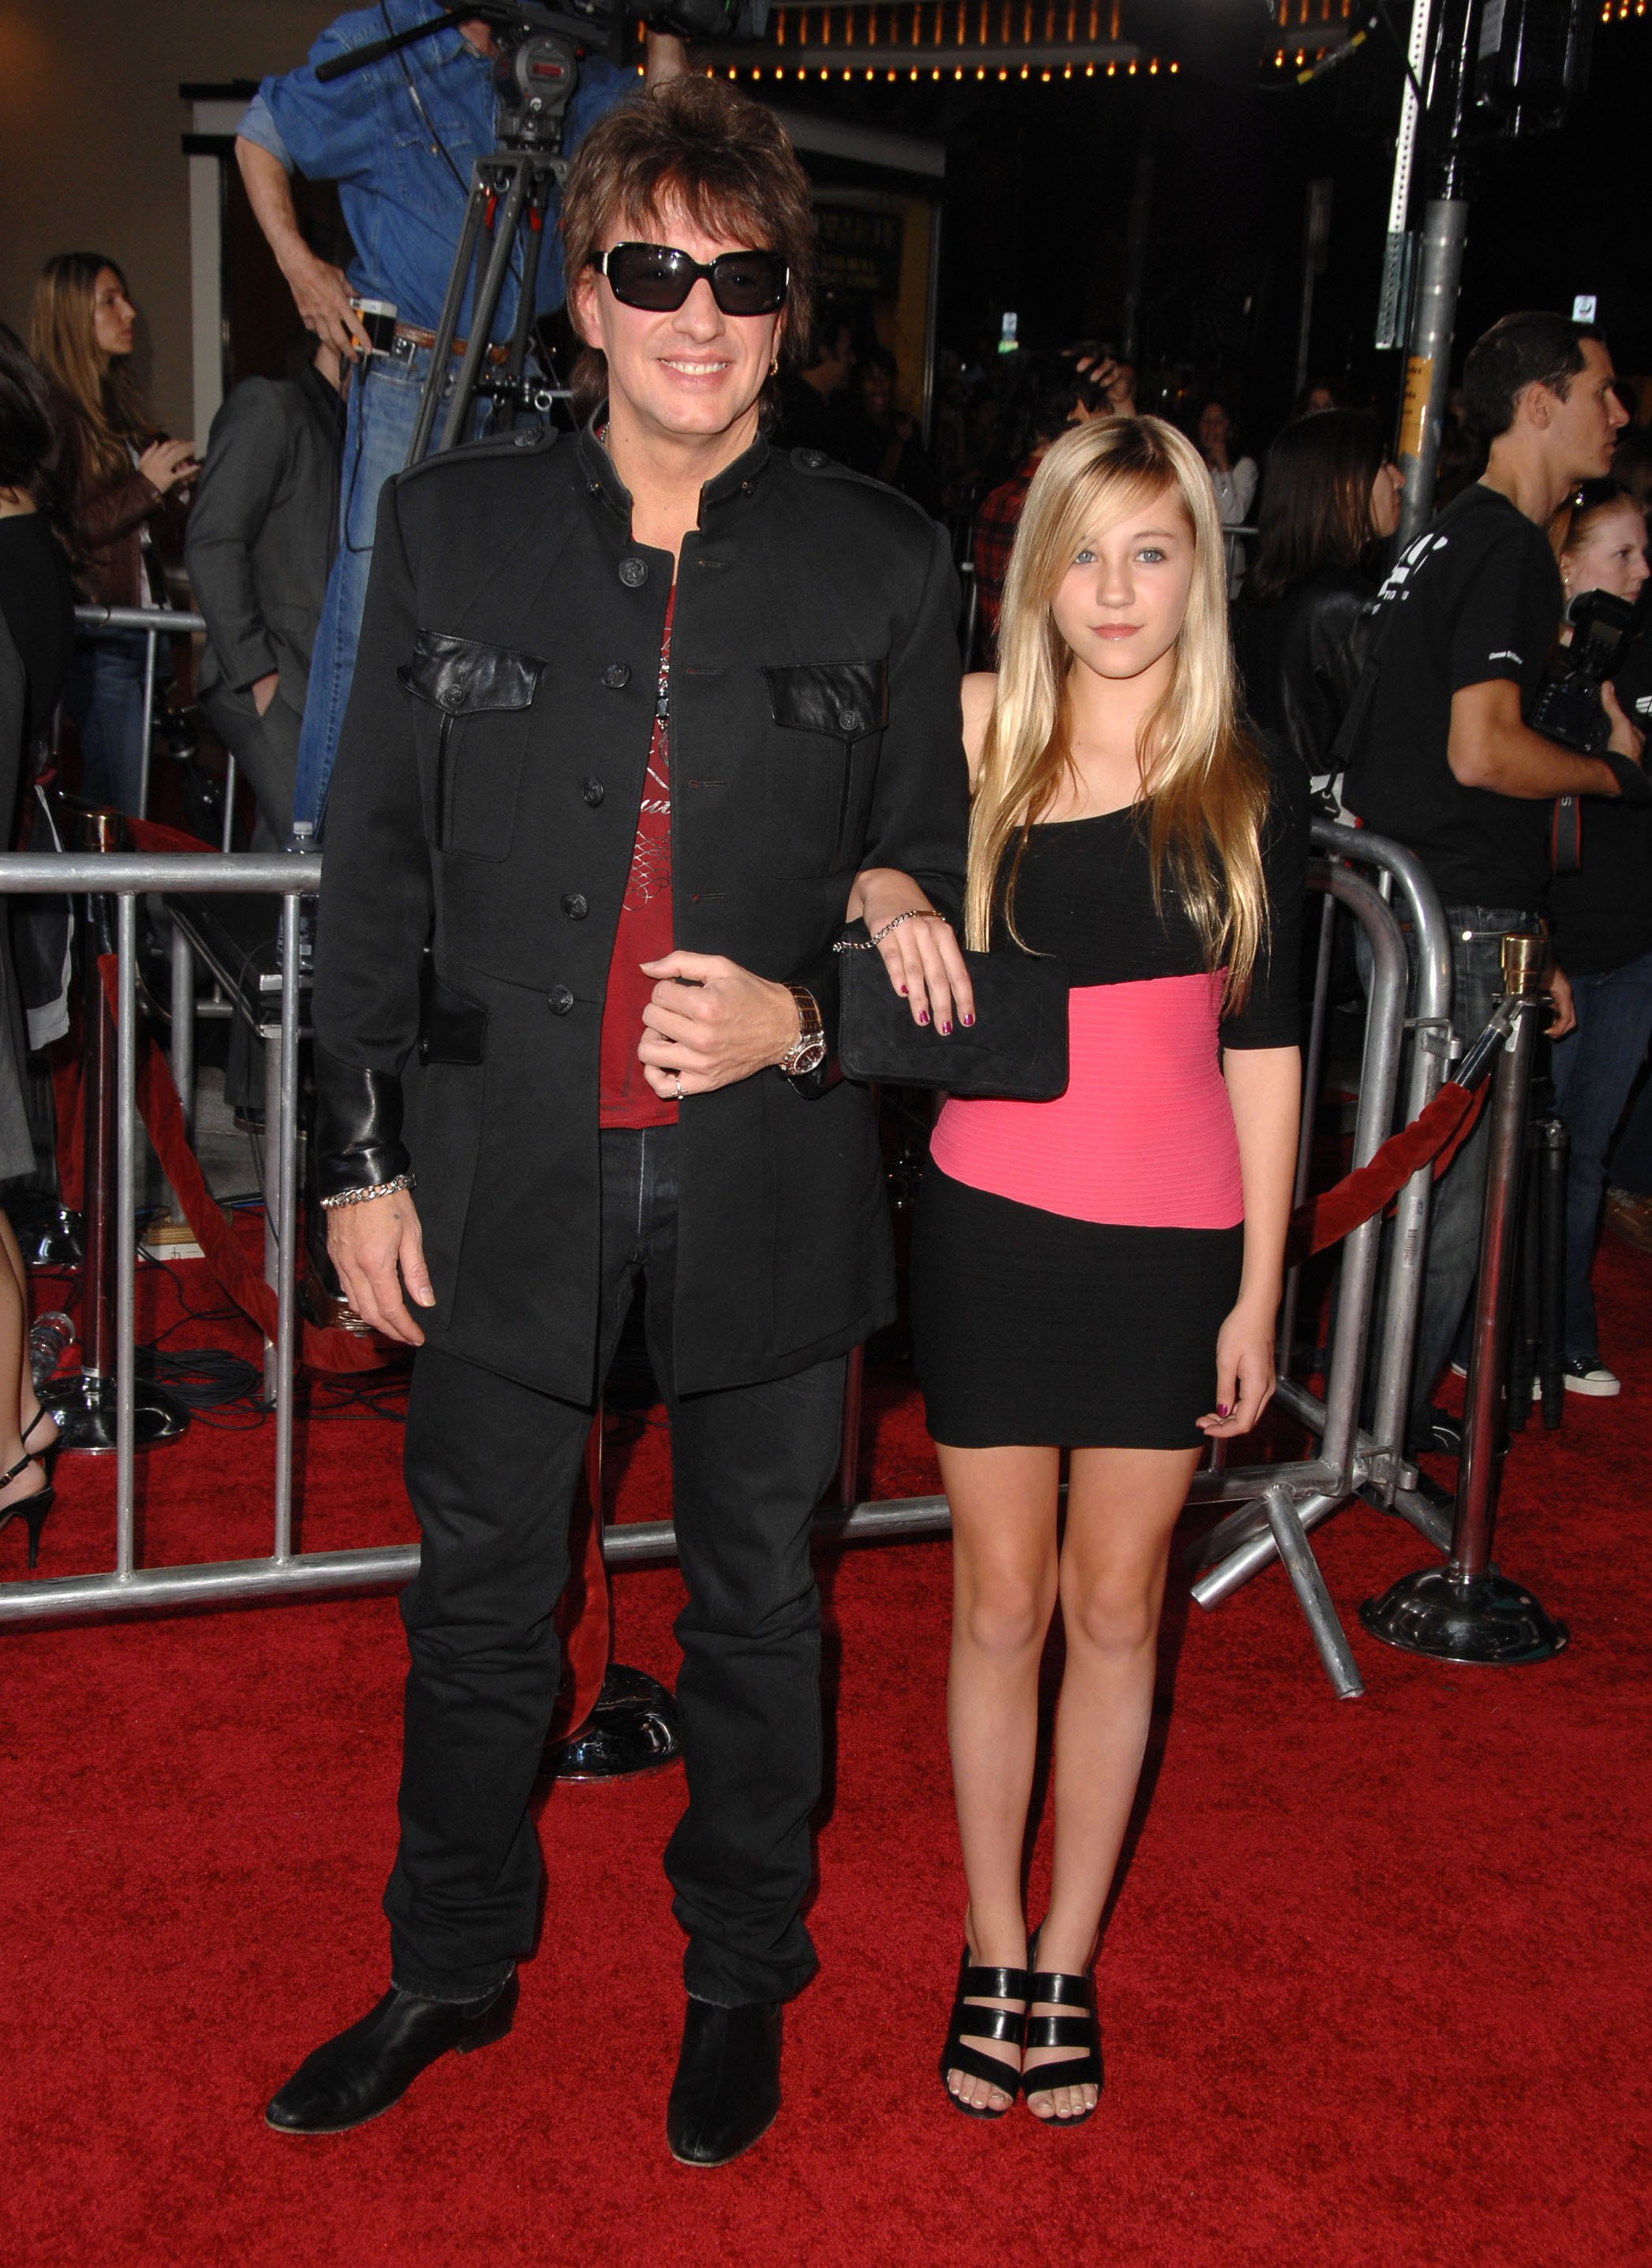 Richie Sambora and Daughter Ava at the premiere of Summit Entertainment's "The Twilight Saga: New Moon" in Westwood, California on November 16, 2009 | Getty Images